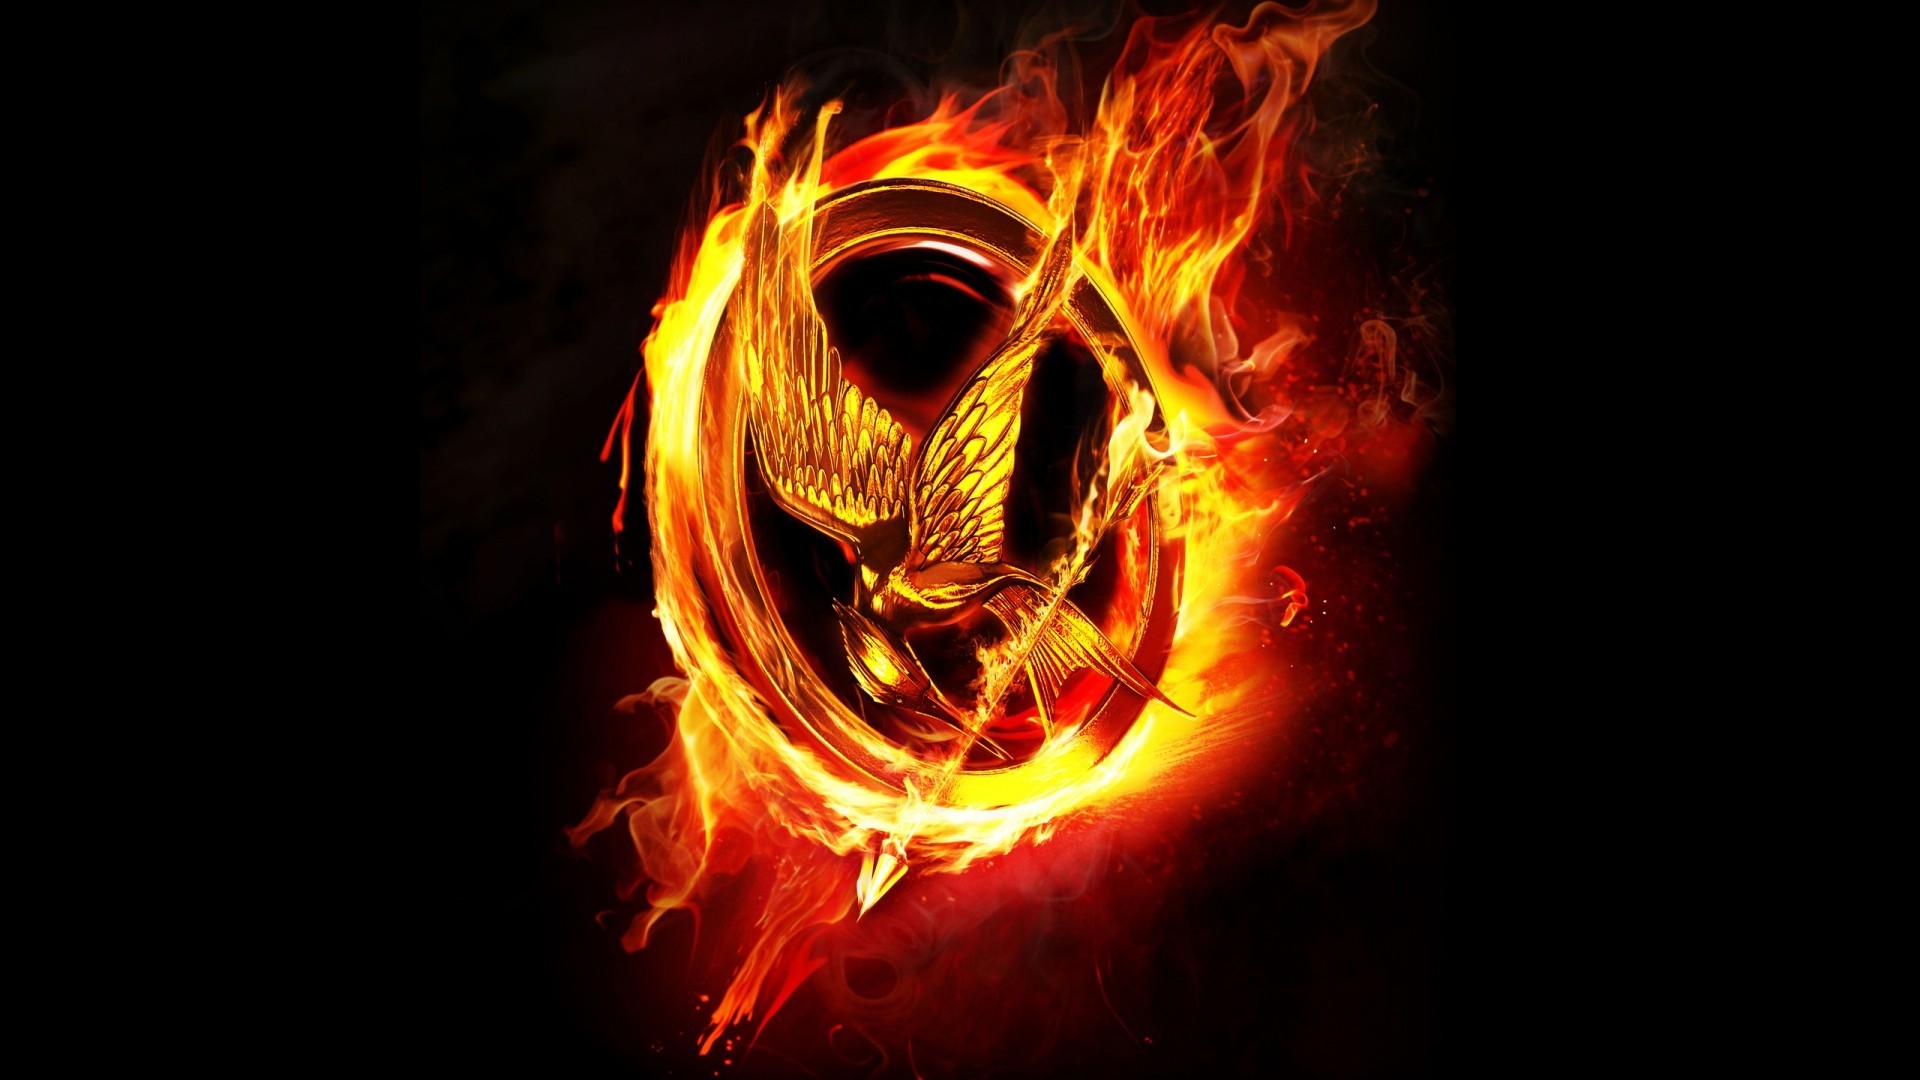 1920x1080 Related Wallpapers from USMC Wallpaper. mockingjay